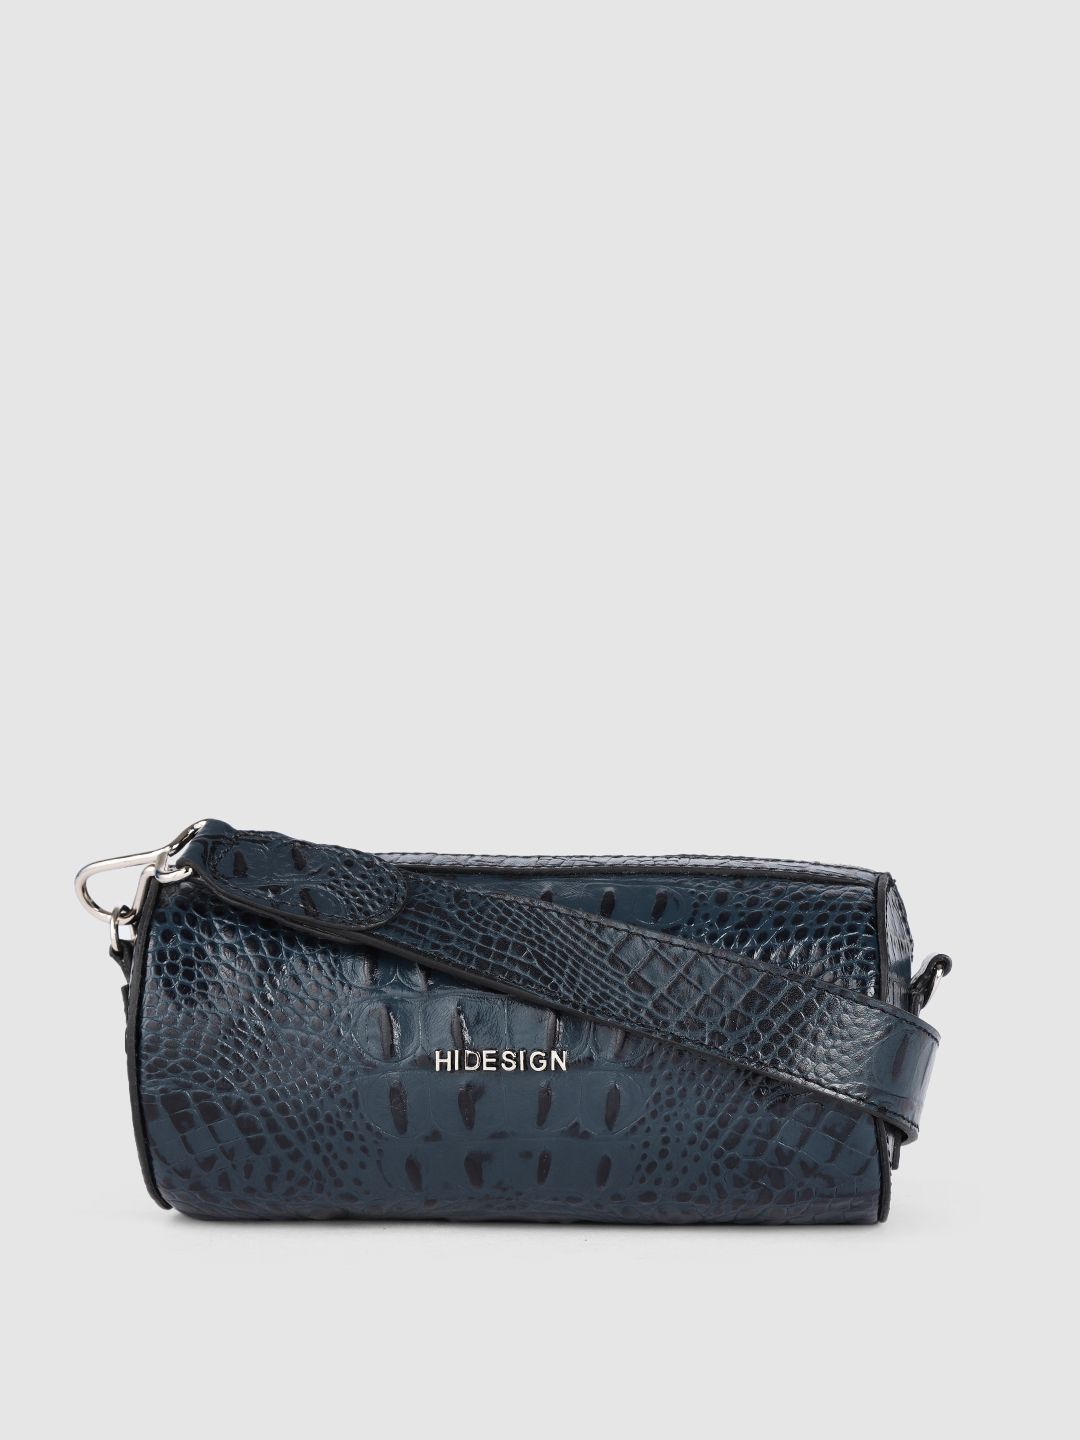 Hidesign Women Navy Blue Textured Leather Sling Bag Price in India